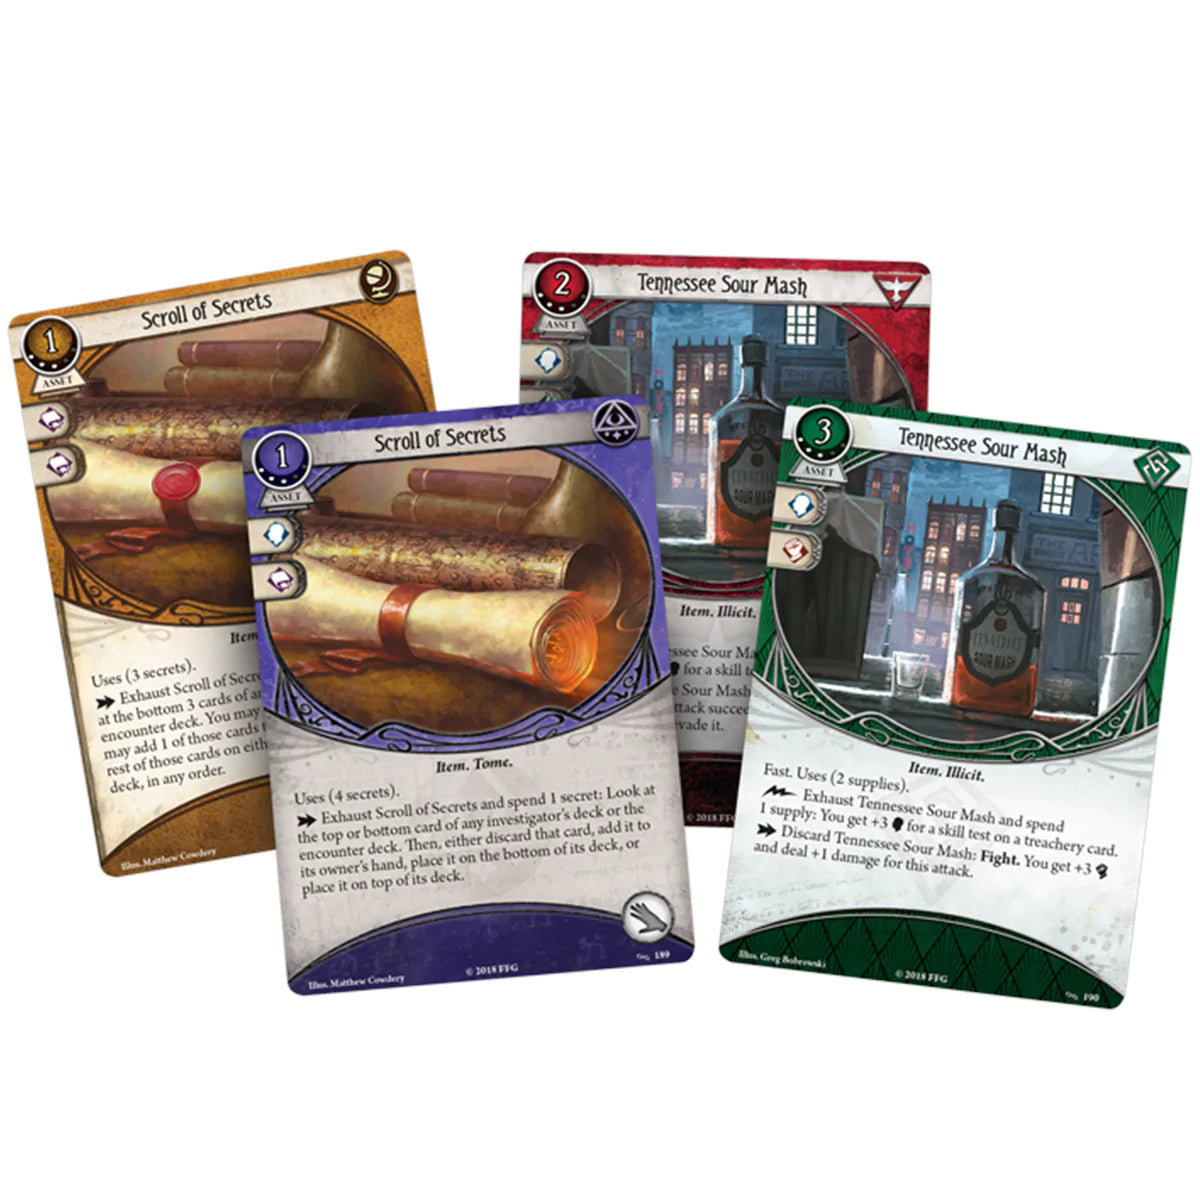 Arkham Horror: The Card Game - For the Greater Good: Mythos Pack